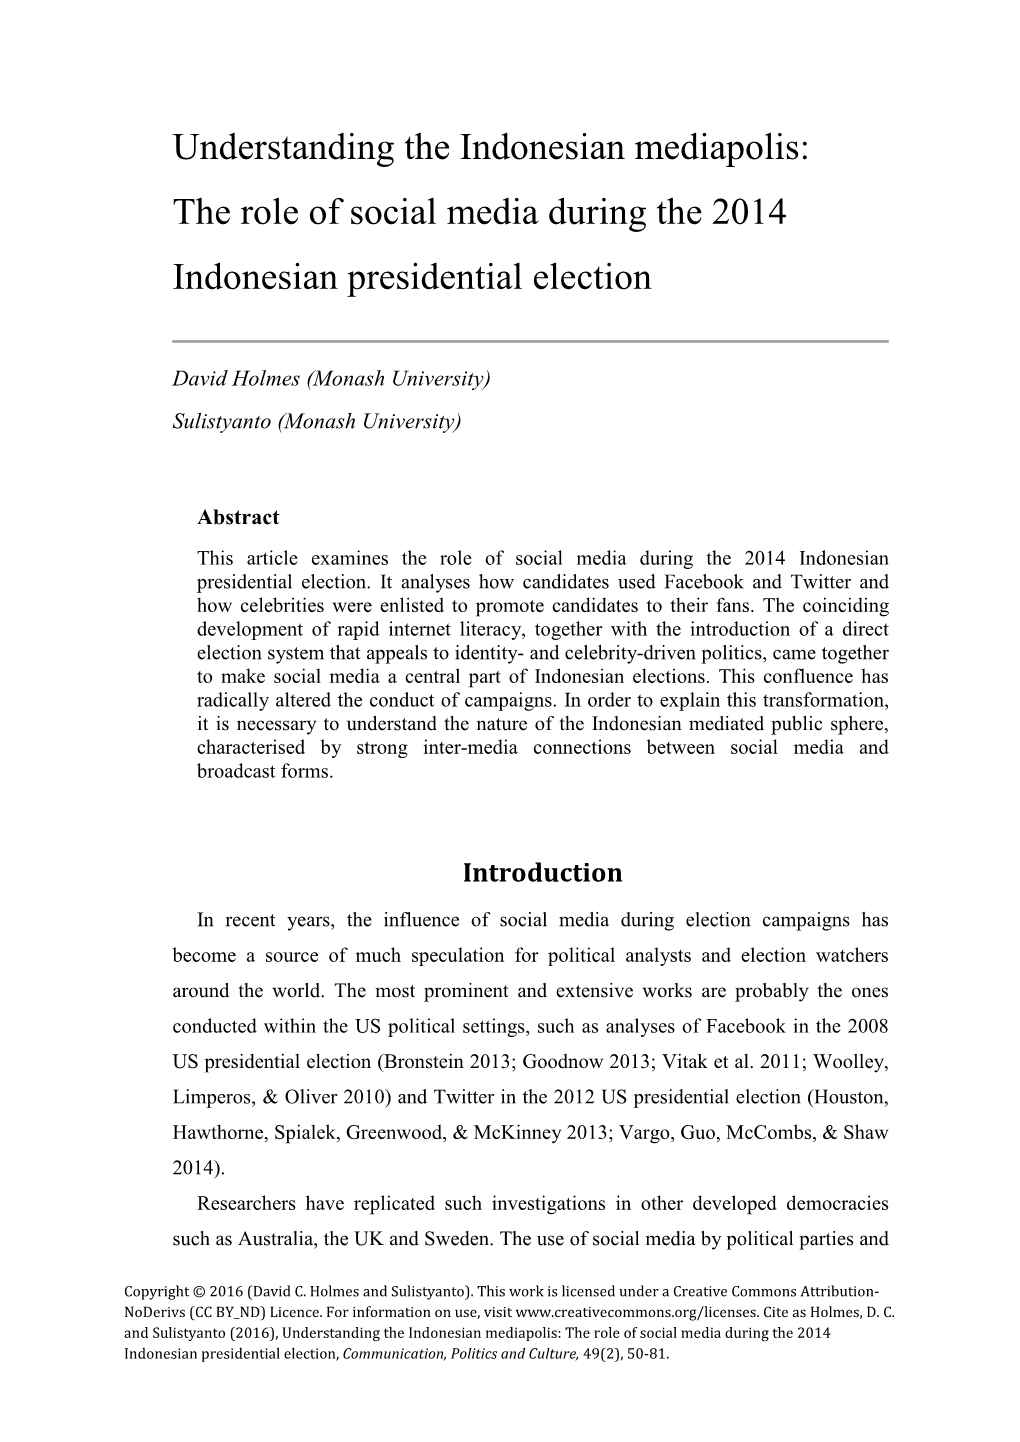 The Role of Social Media During the 2014 Indonesian Presidential Election